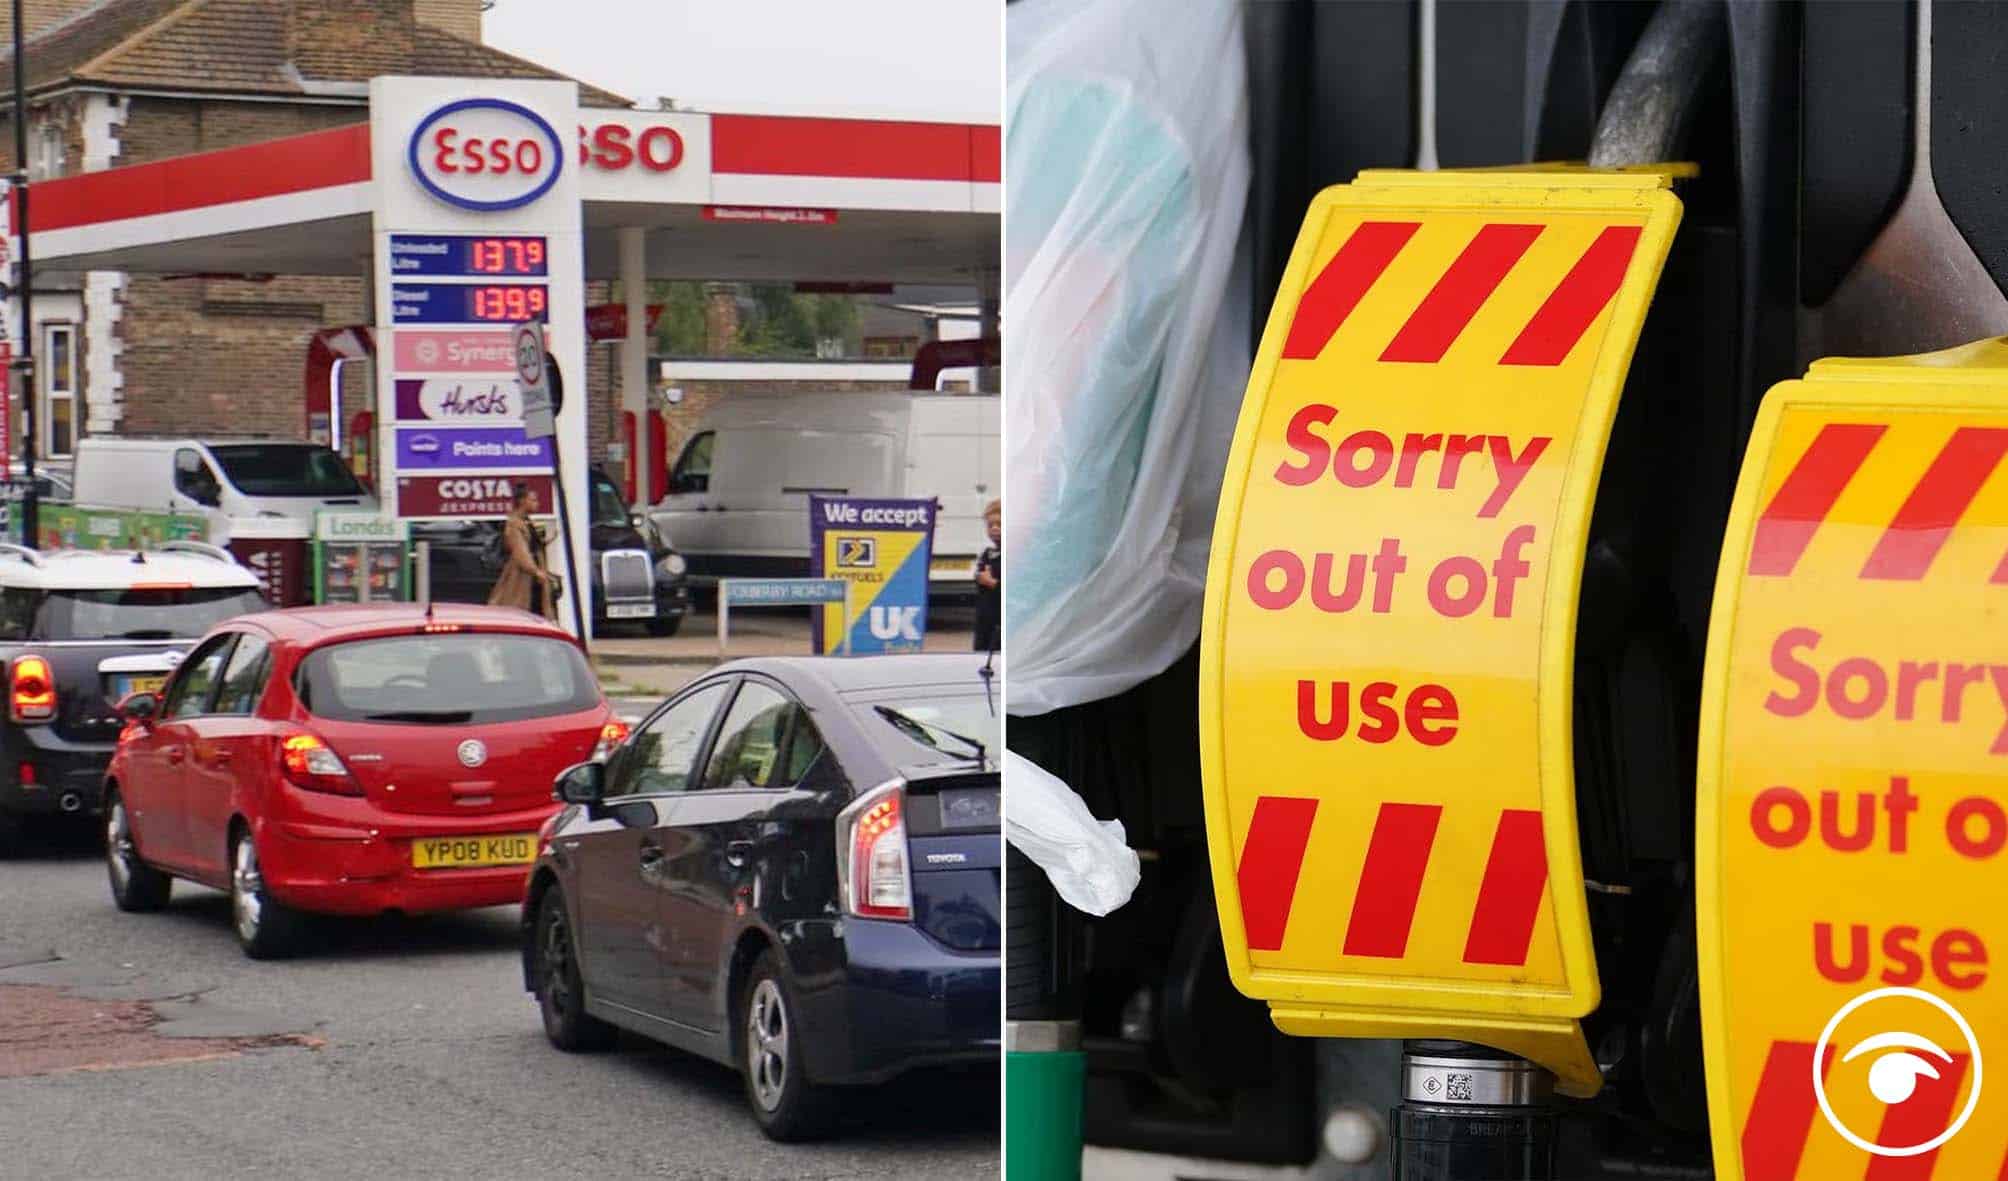 Petrol panic causing ‘really serious problems’ as pumps run dry – this meme sums it up perfectly